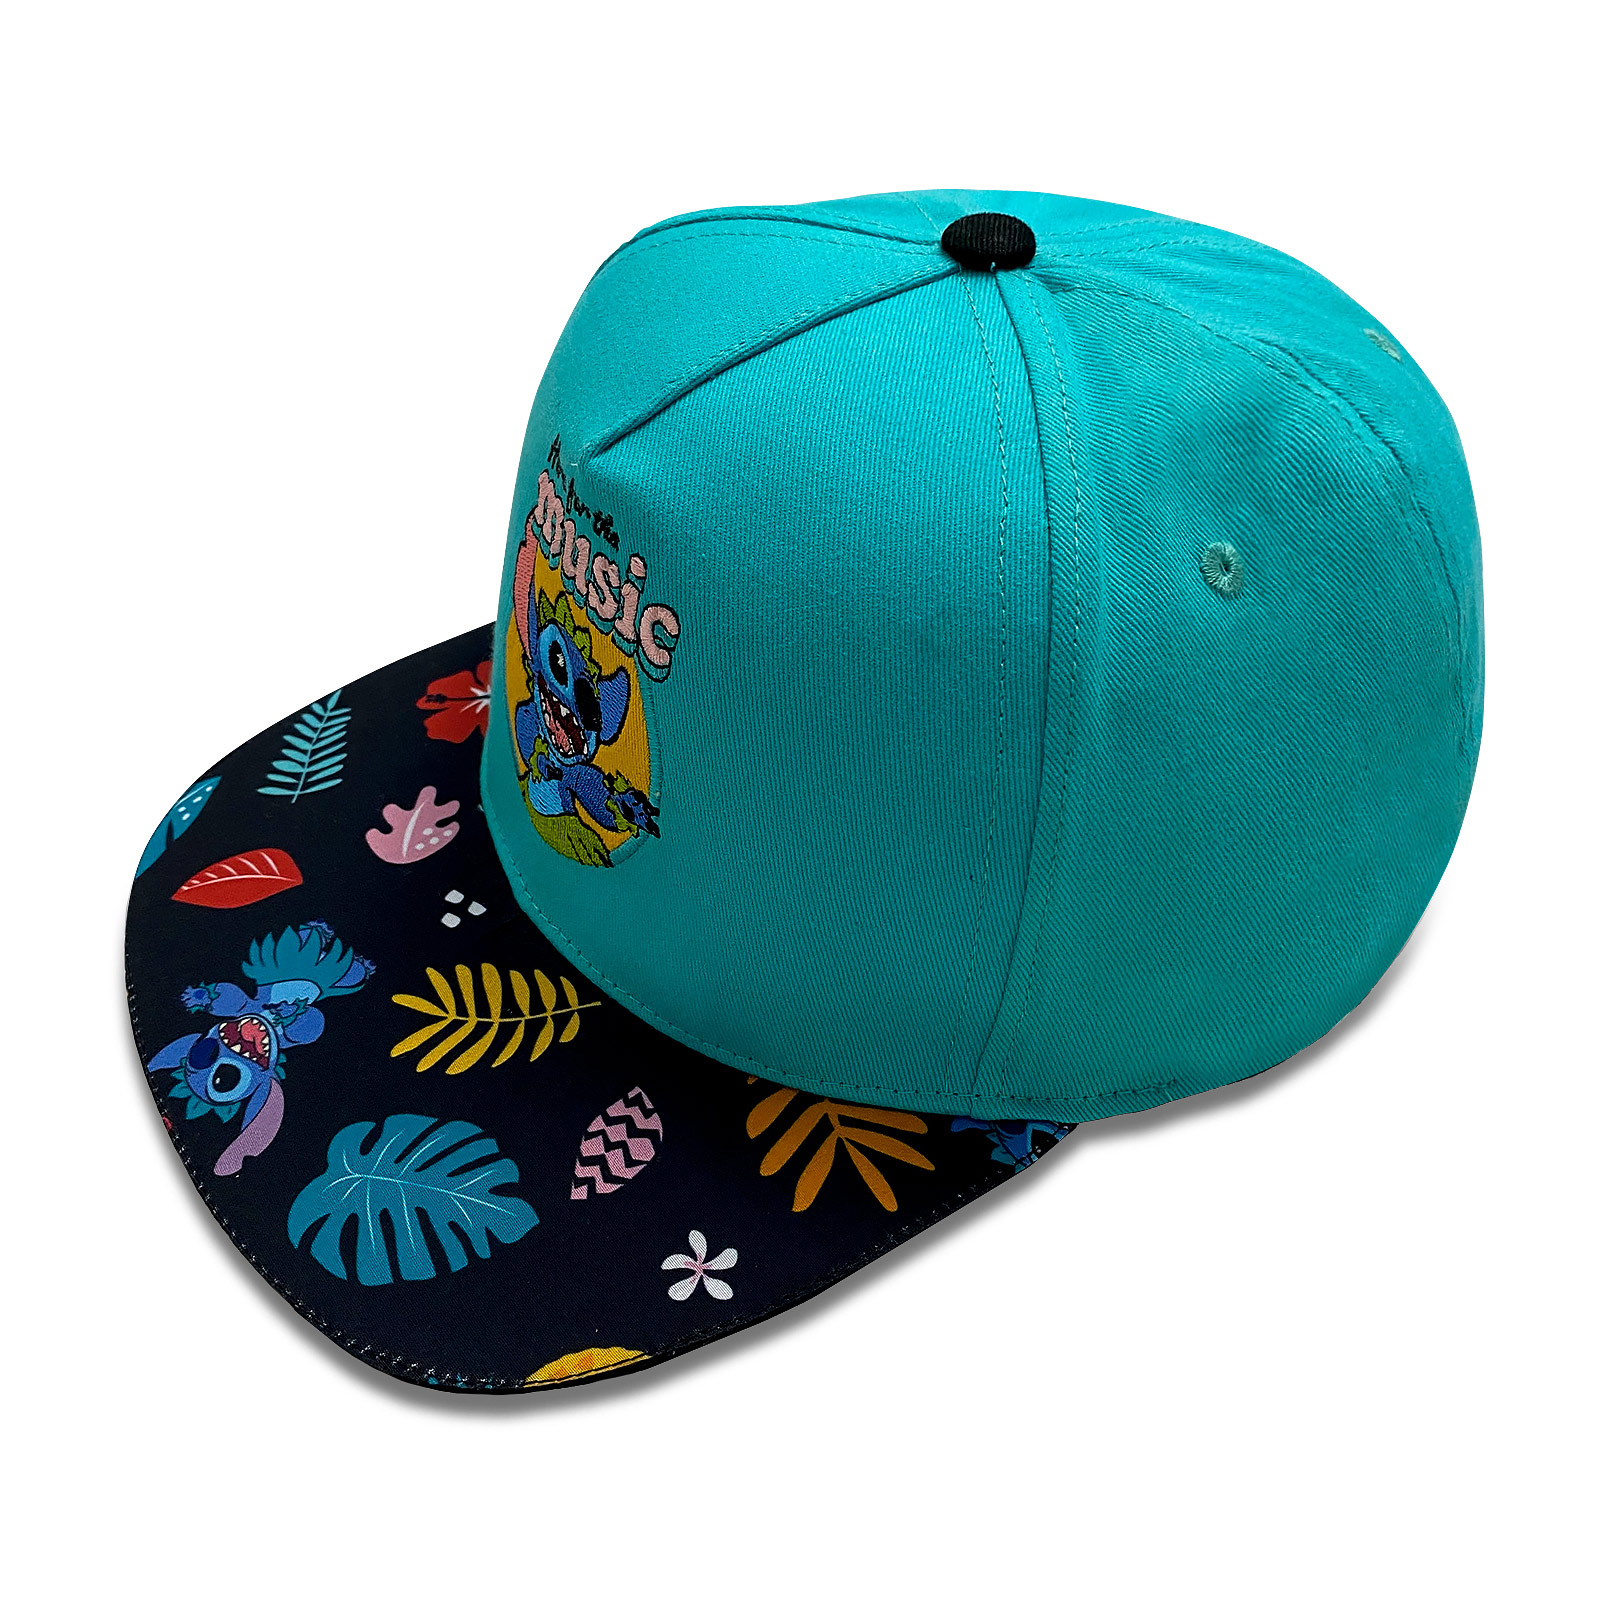 Lilo & Stitch - Here For The Music Snapback Cap